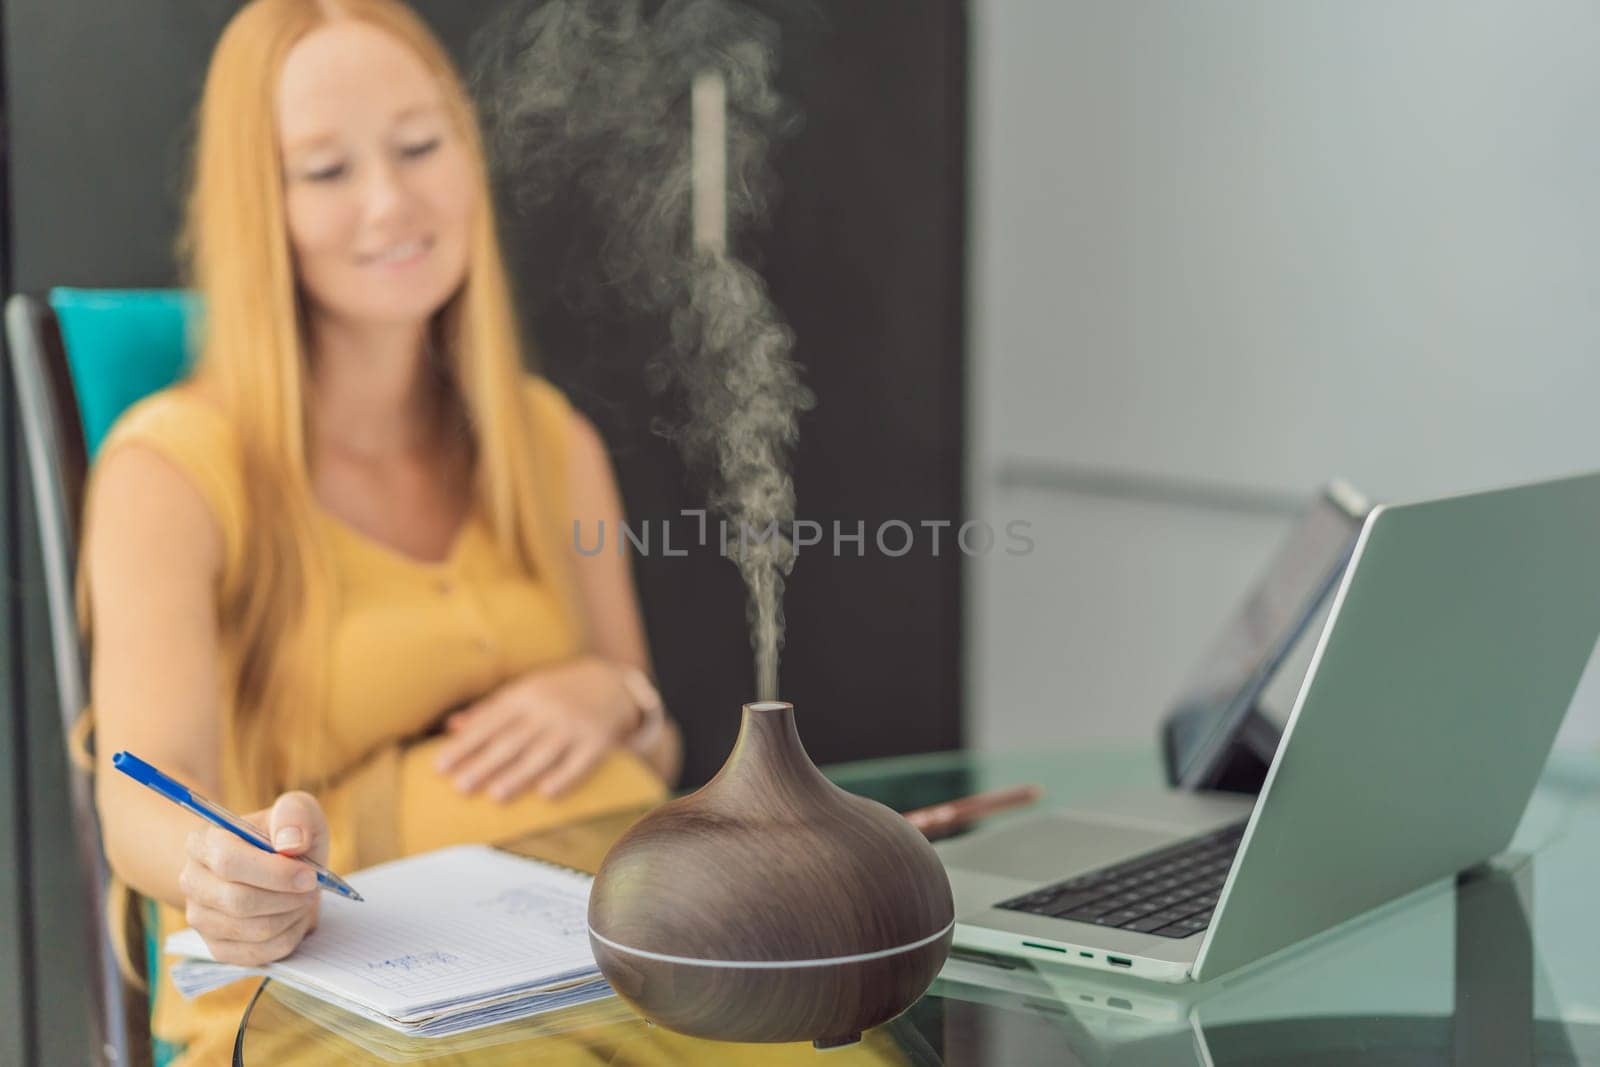 Expectant woman enhances work environment, using an aroma diffuser for a soothing atmosphere during pregnancy by galitskaya